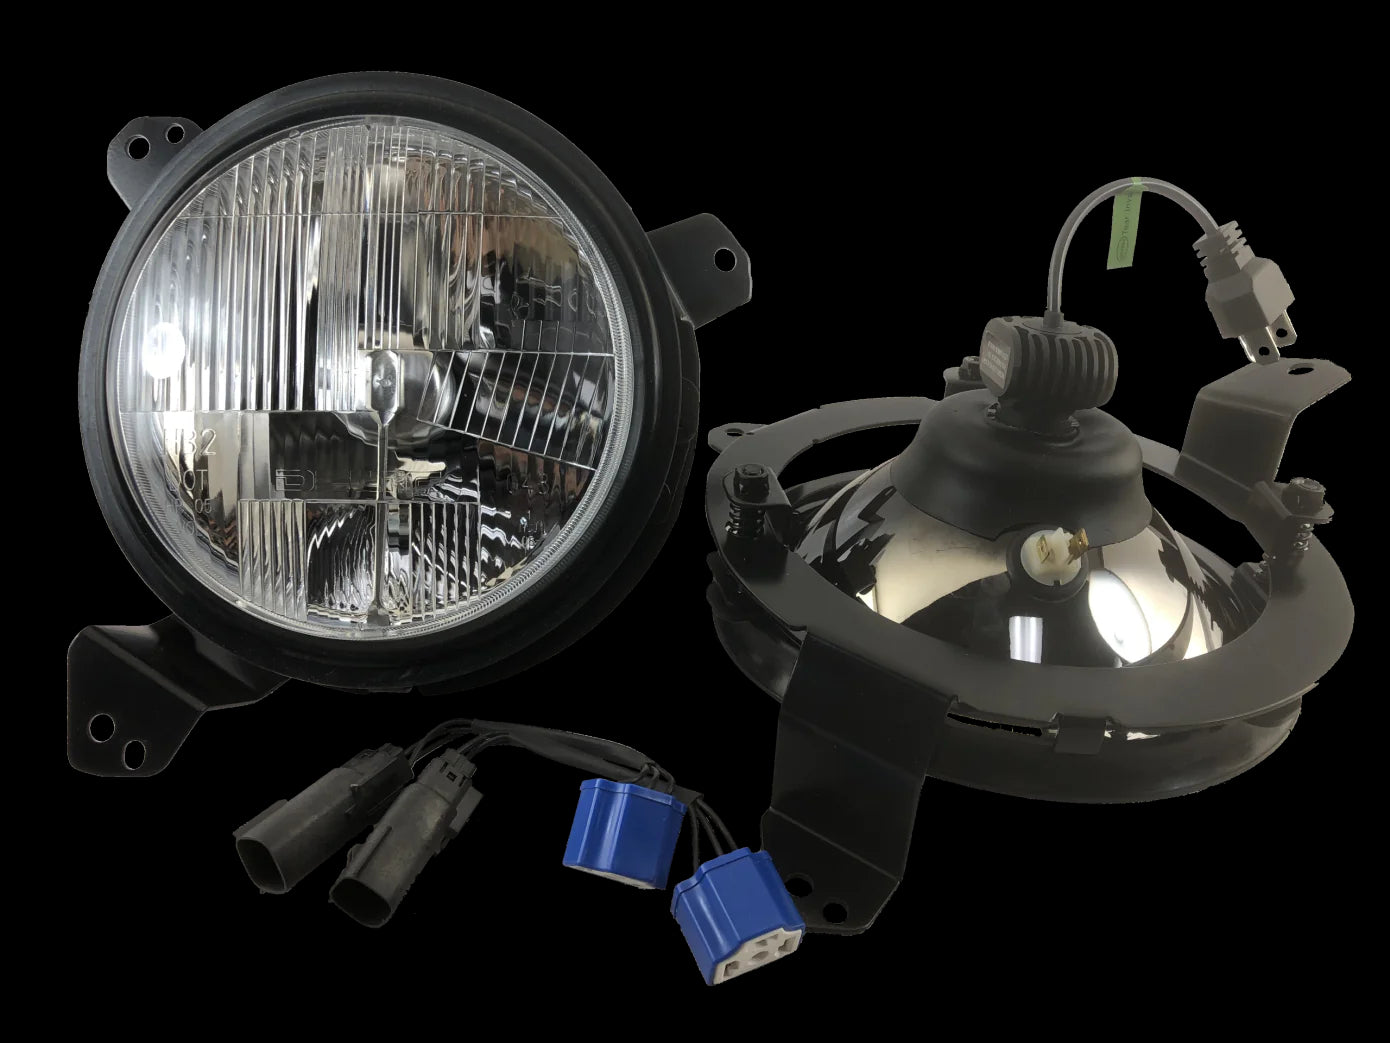 HID lights are more energy-efficient than halogen bulbs but may require additional components